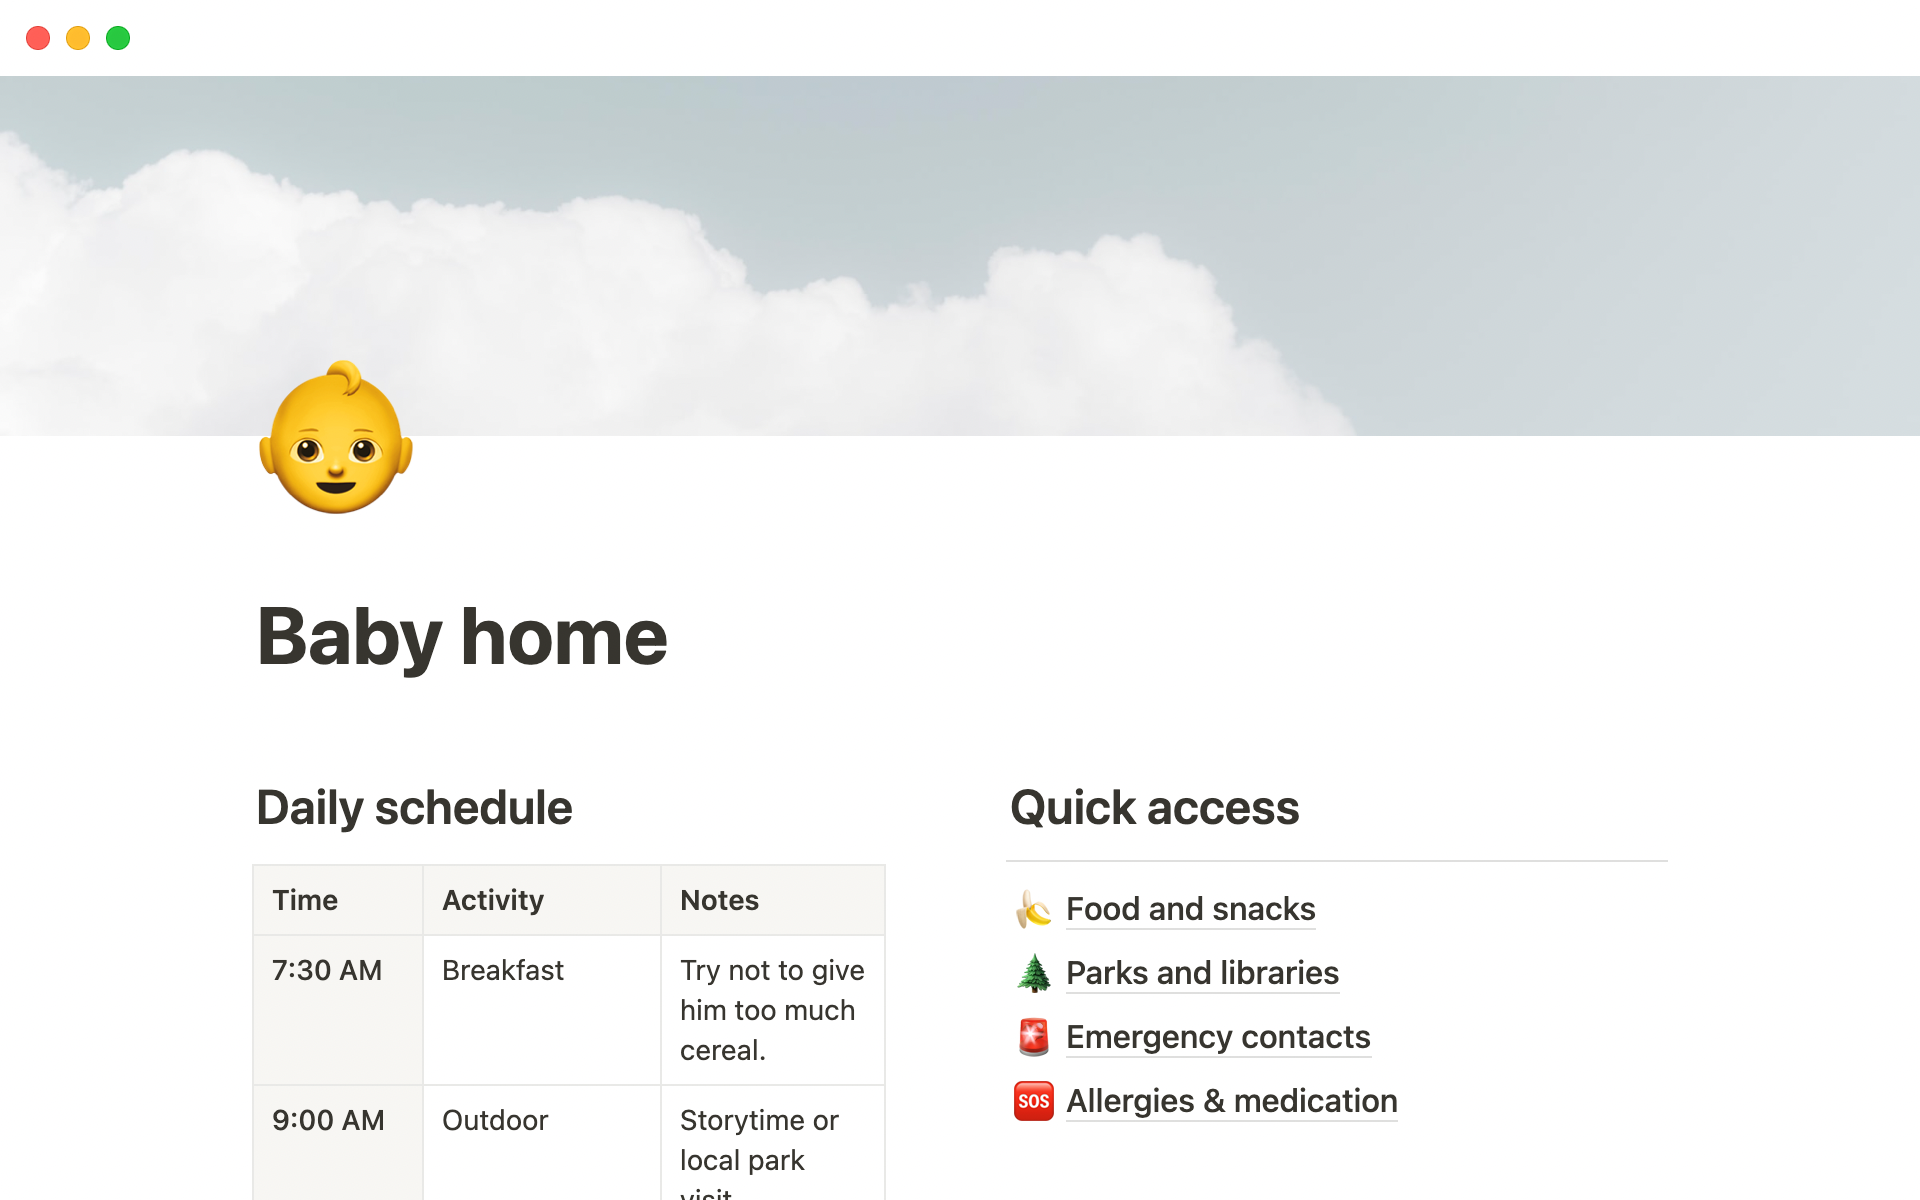 A home for all things baby related. Keep track of upcoming tasks, playdates, and even emergency information for the nanny.